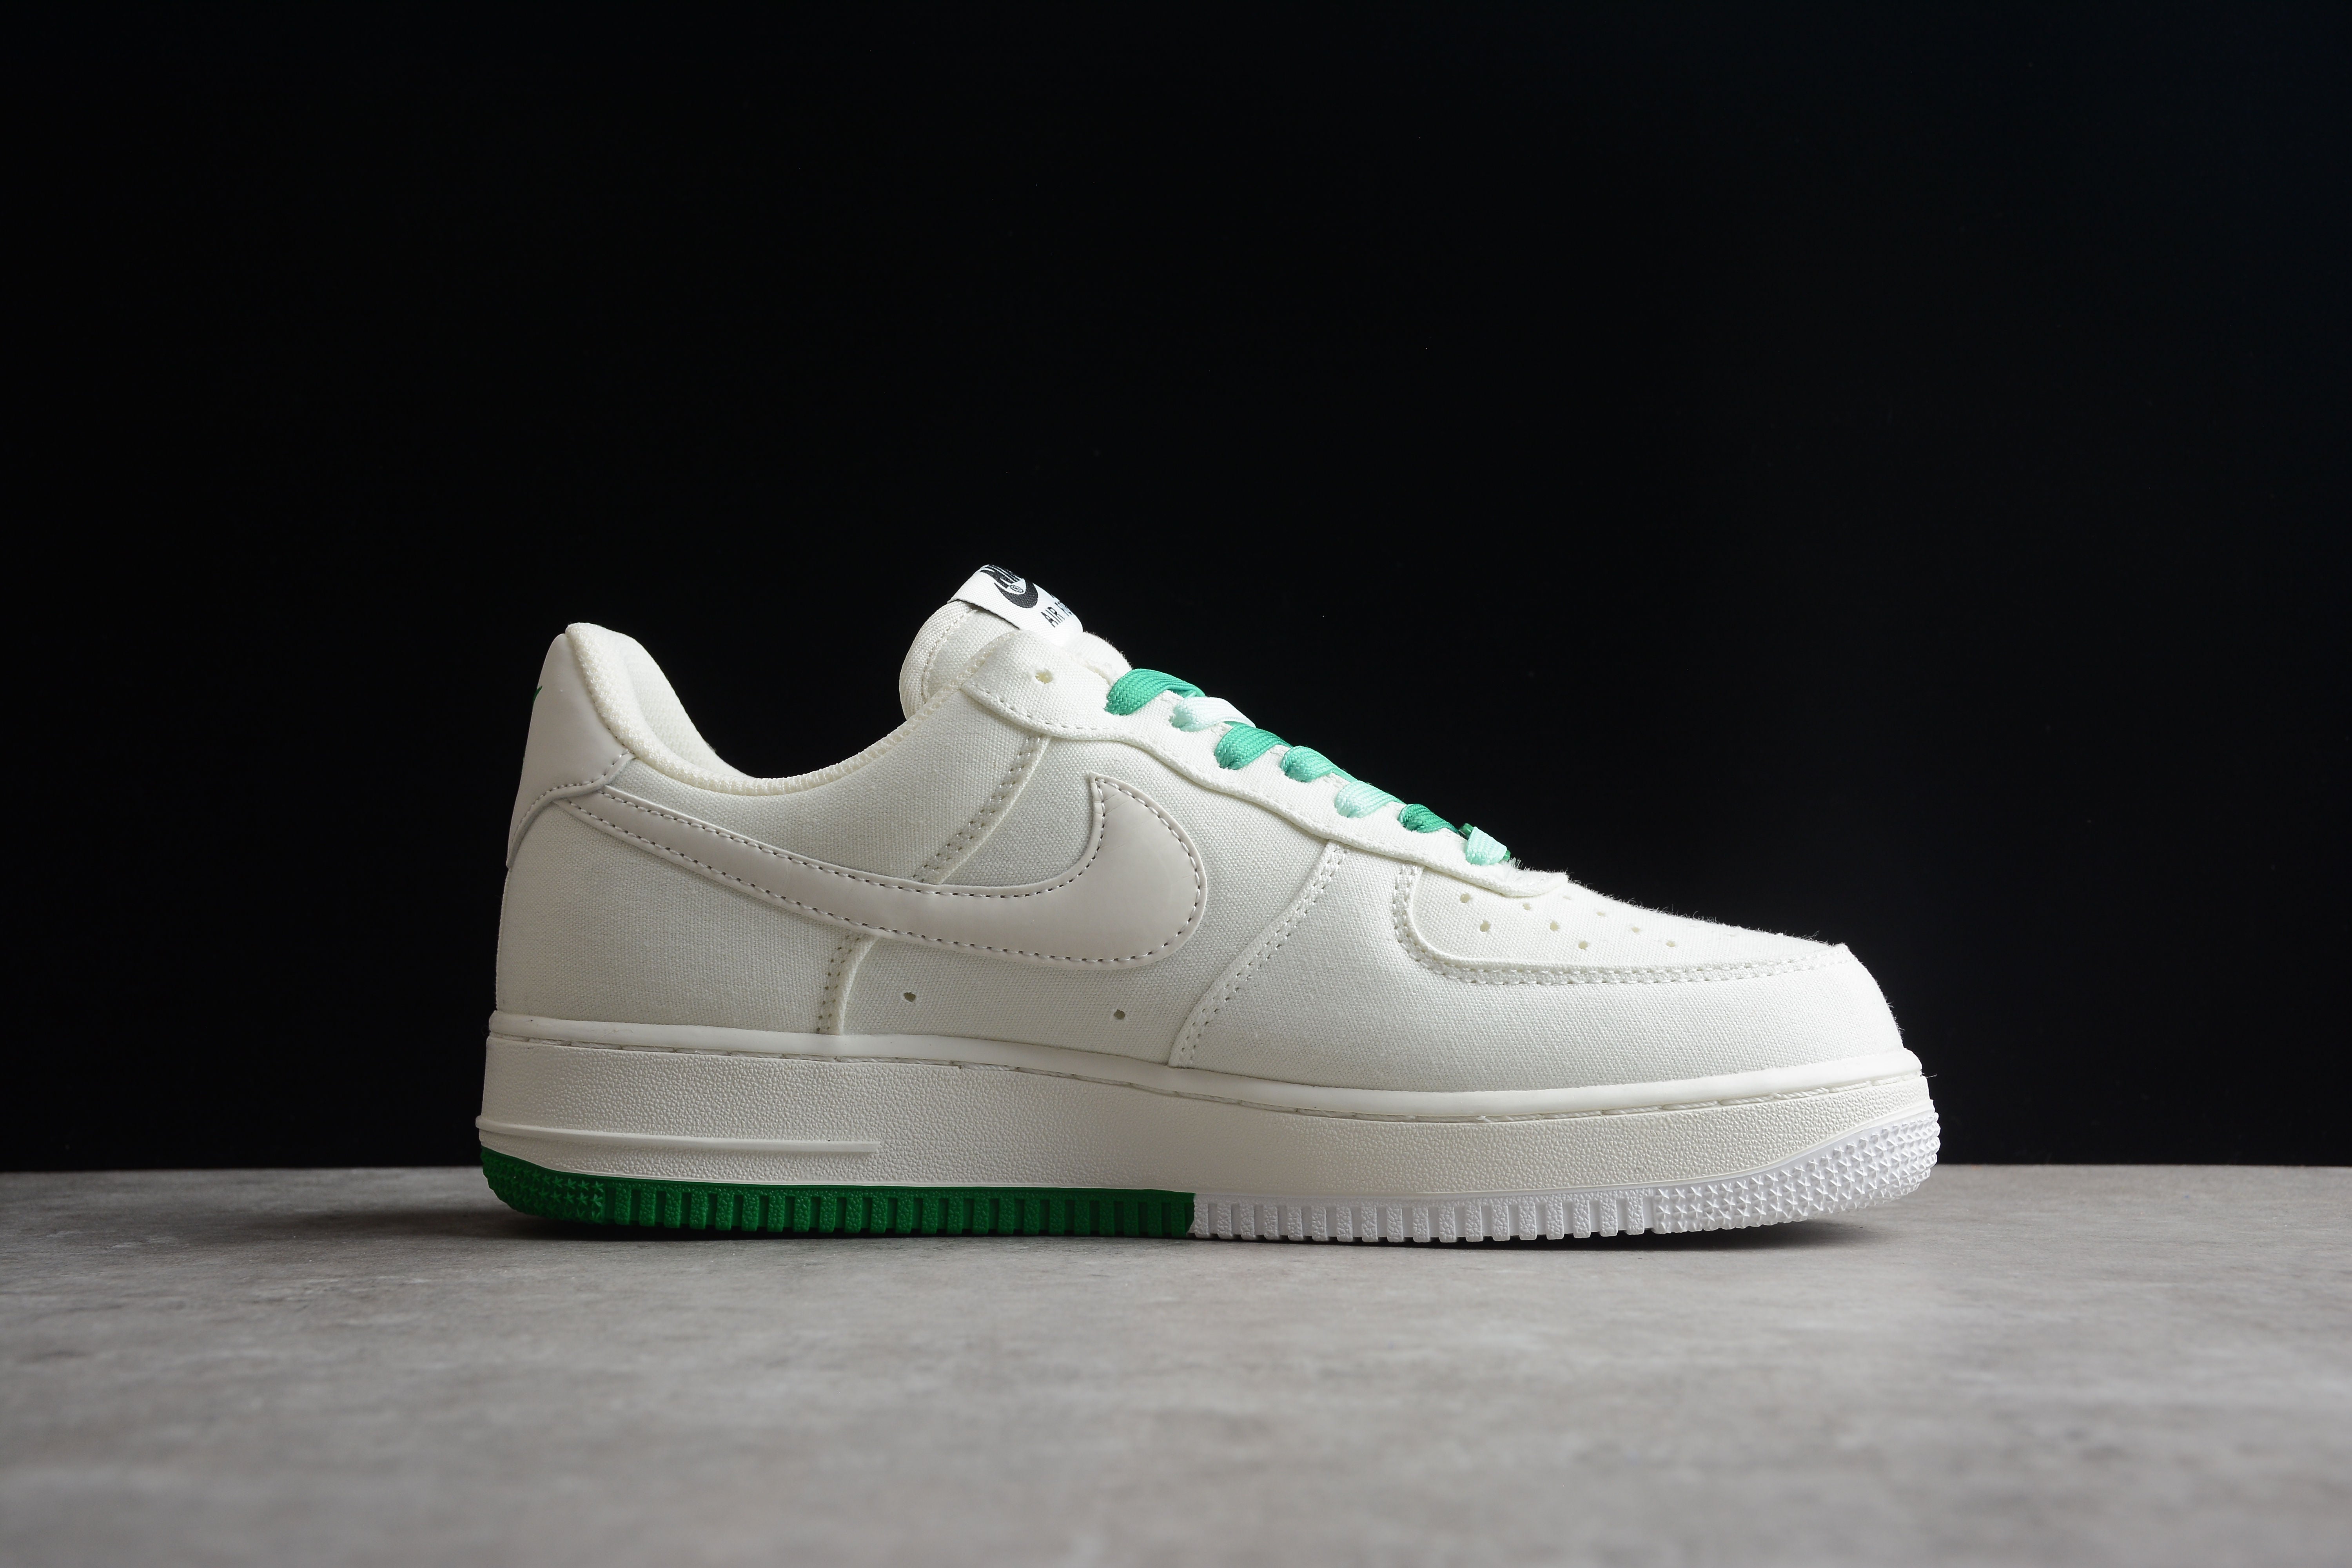 Nike airforce A1 white-green shoes